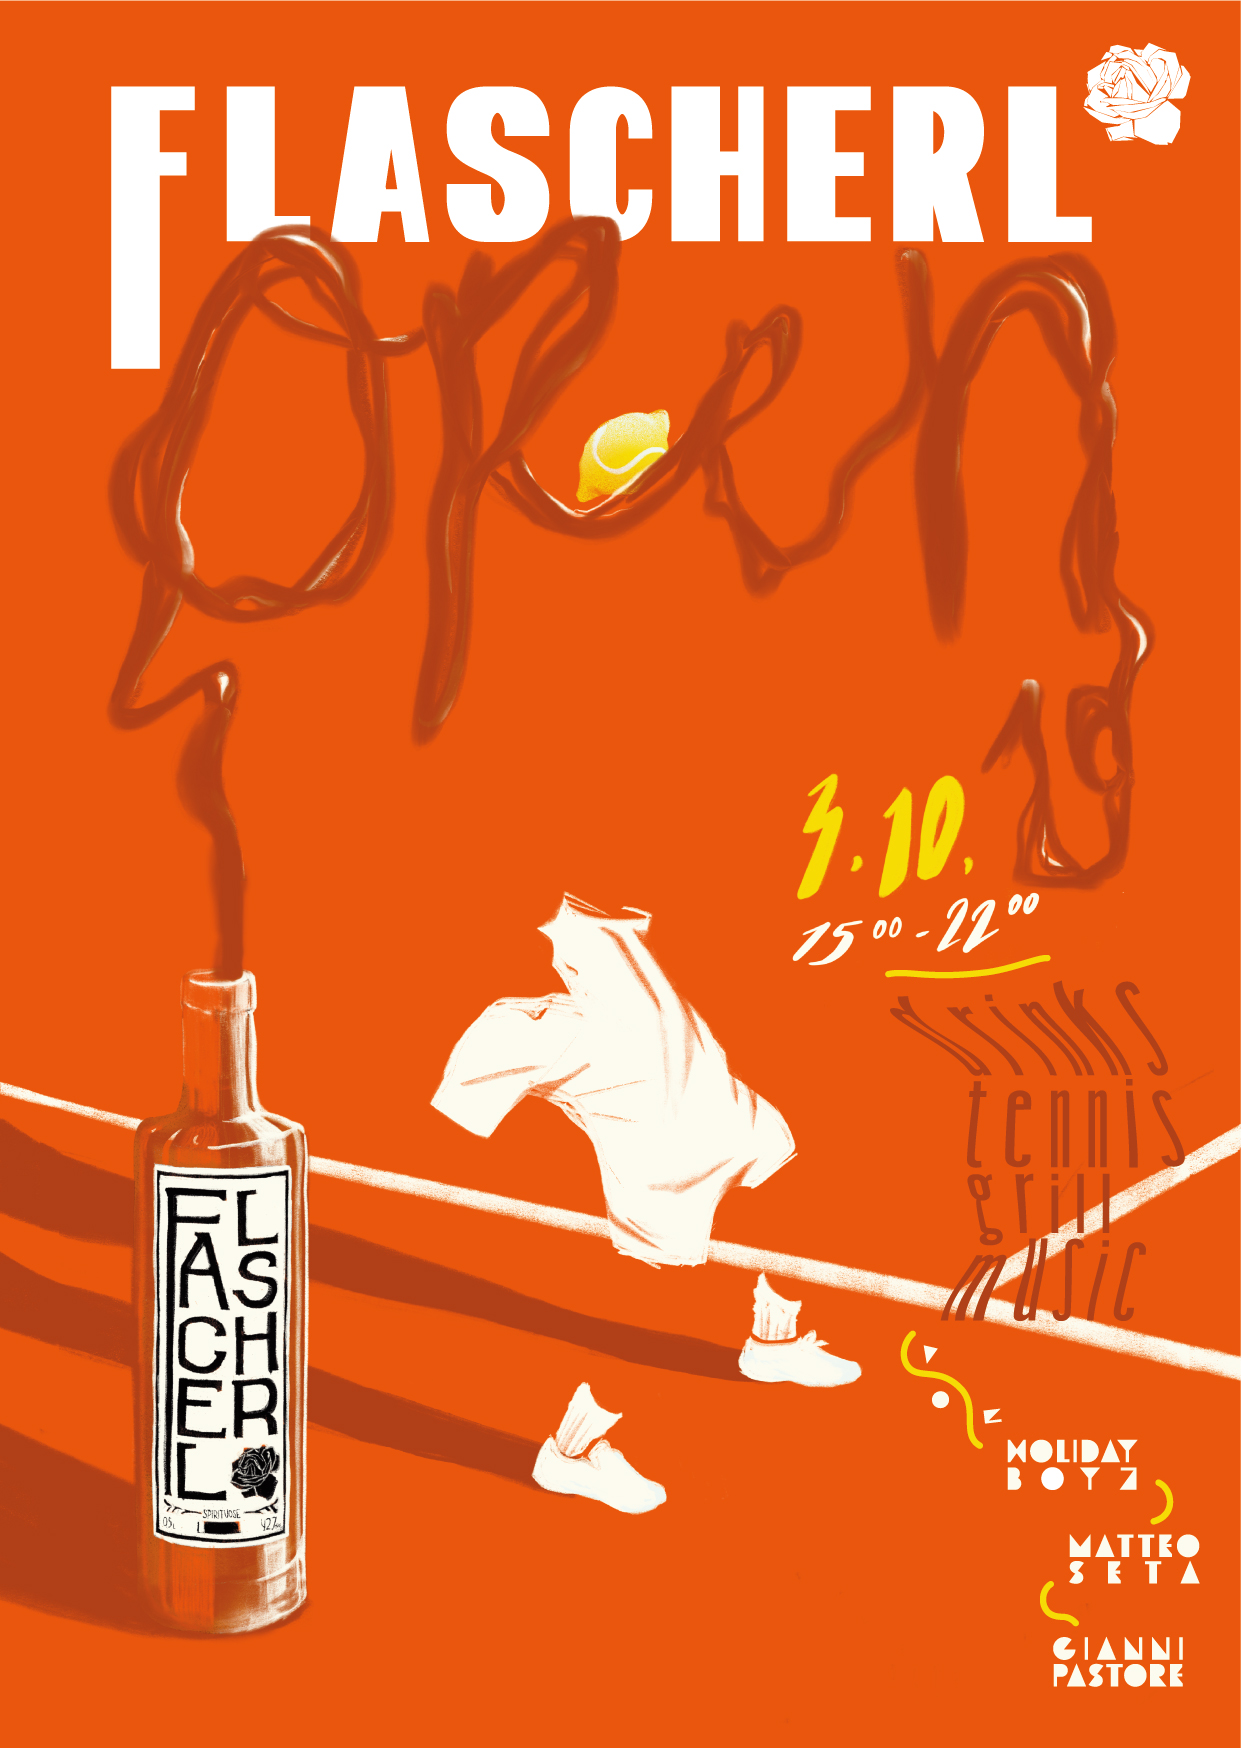 This is a poster of the flascherl open. A sports event powered by the flascherl spirit. 